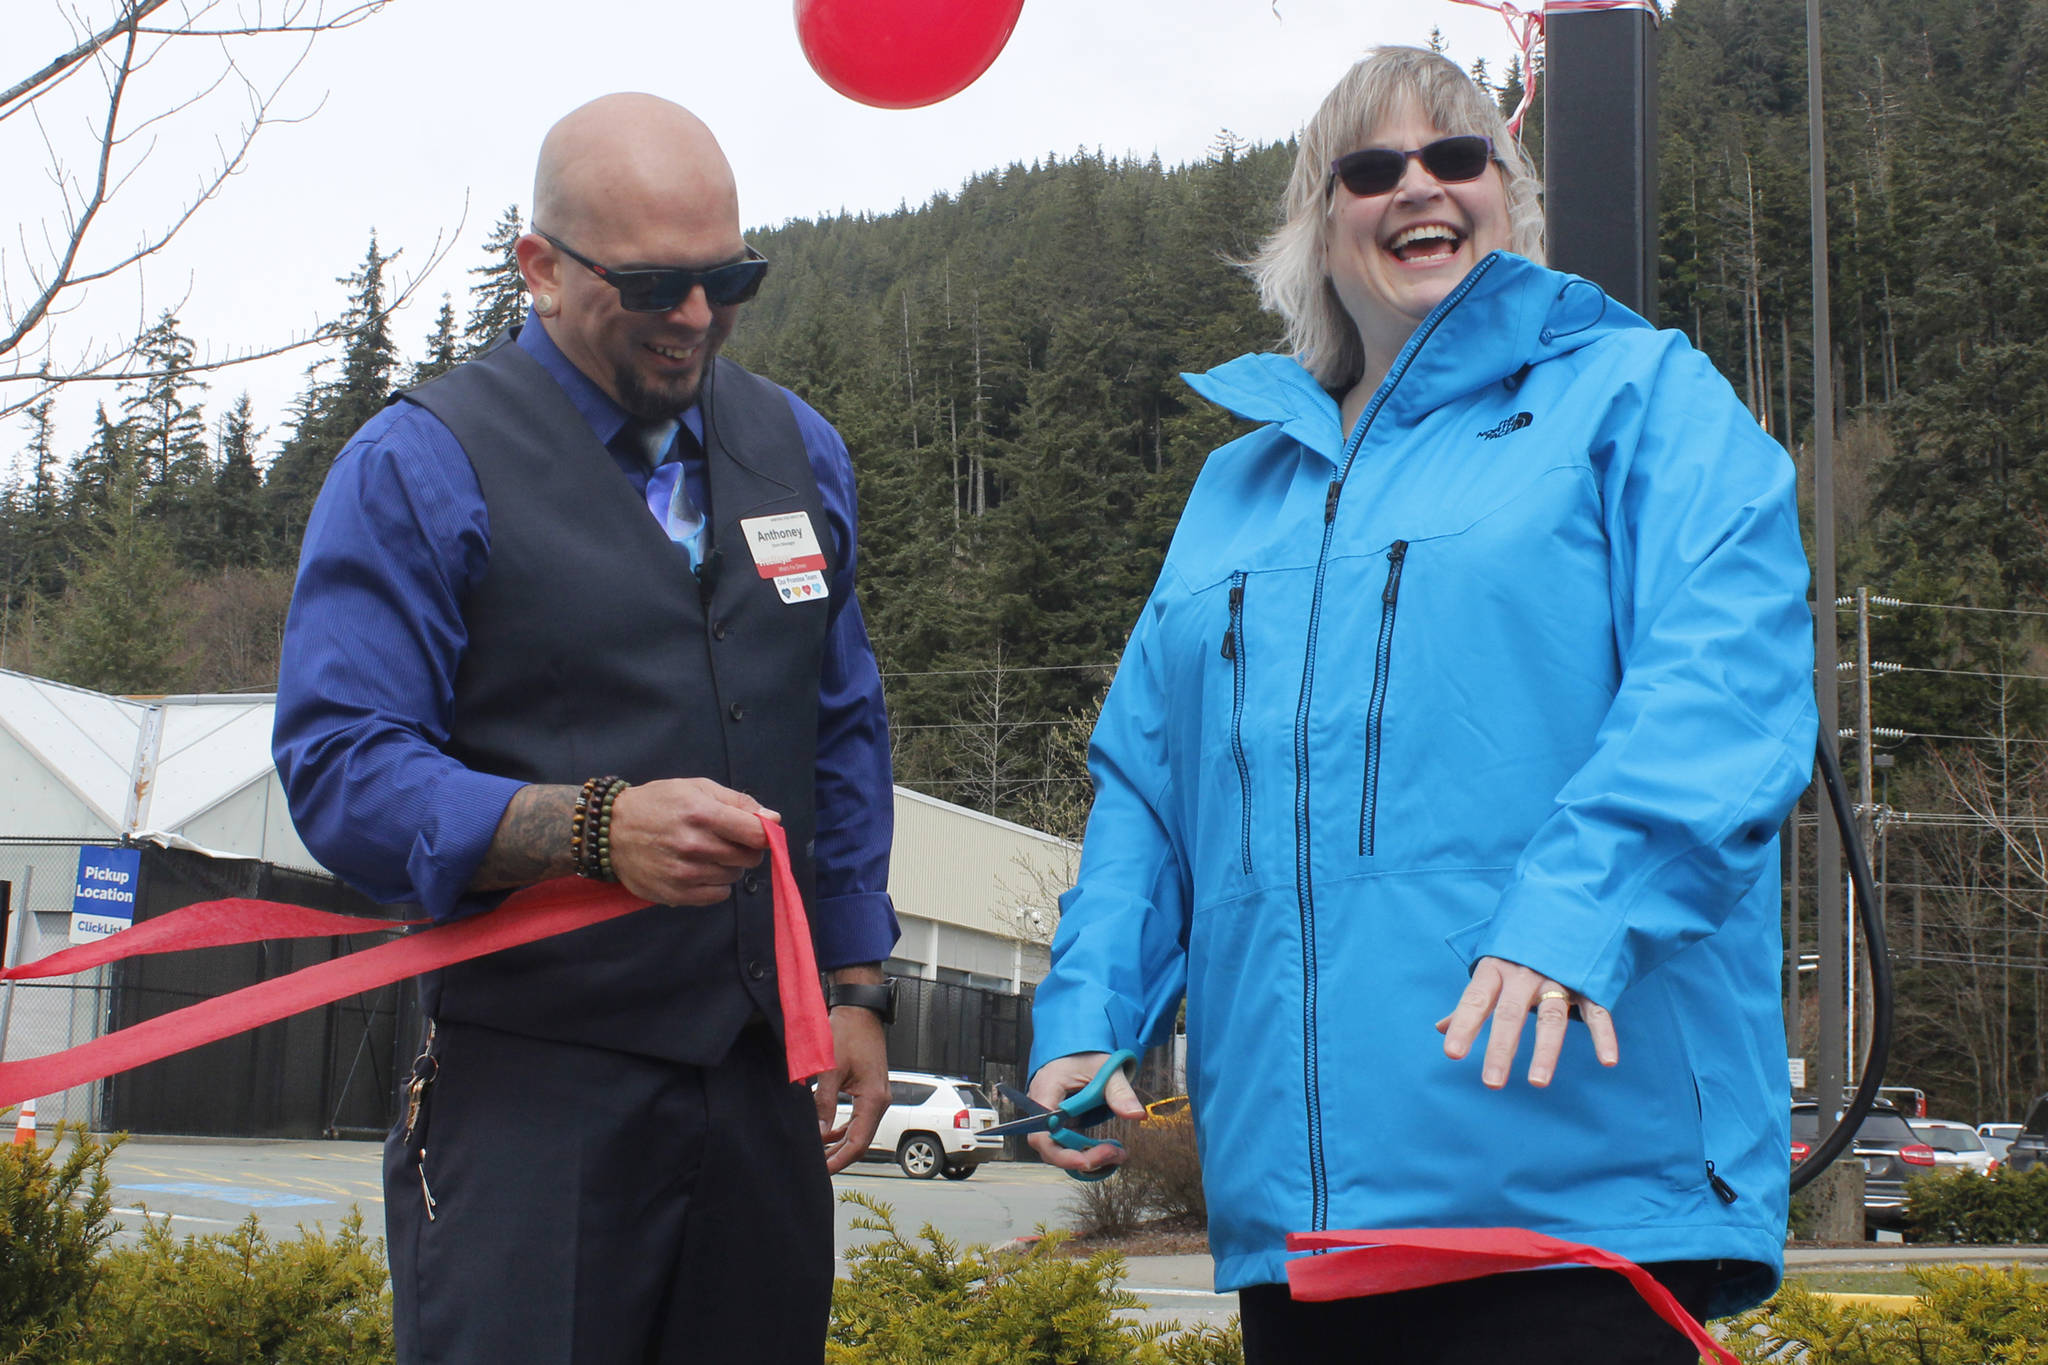 Juneau Mayor Beth Weldon laughs as she and Fred Meyer Store Manager Anthoney Gurule cut a ribbon unveiling four new electric vehicle chargers at Fred Meyer on Saturday, April 20, 2019. (Alex McCarthy | Juneau Empire)